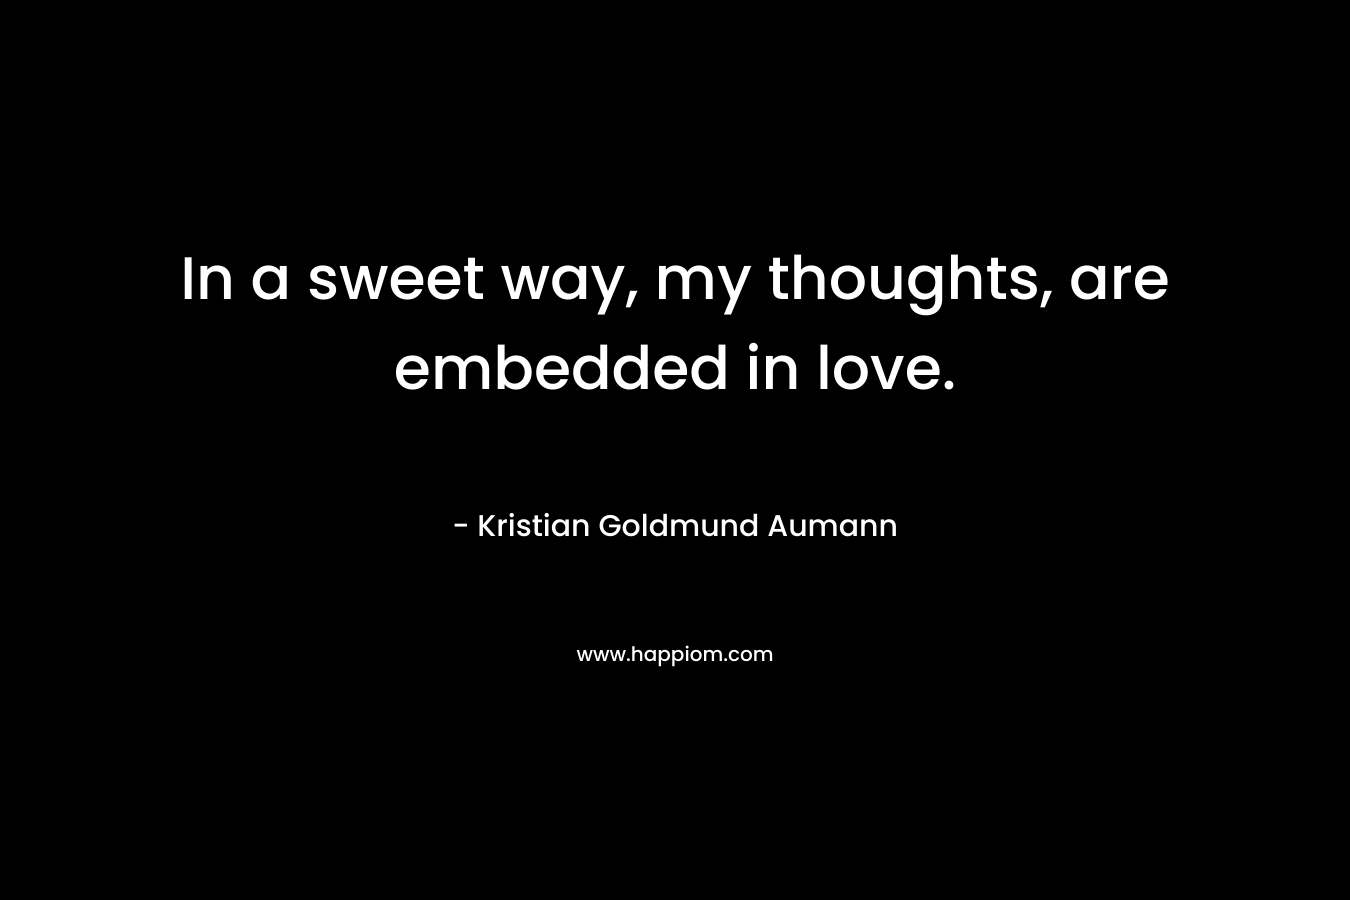 In a sweet way, my thoughts, are embedded in love. – Kristian Goldmund Aumann